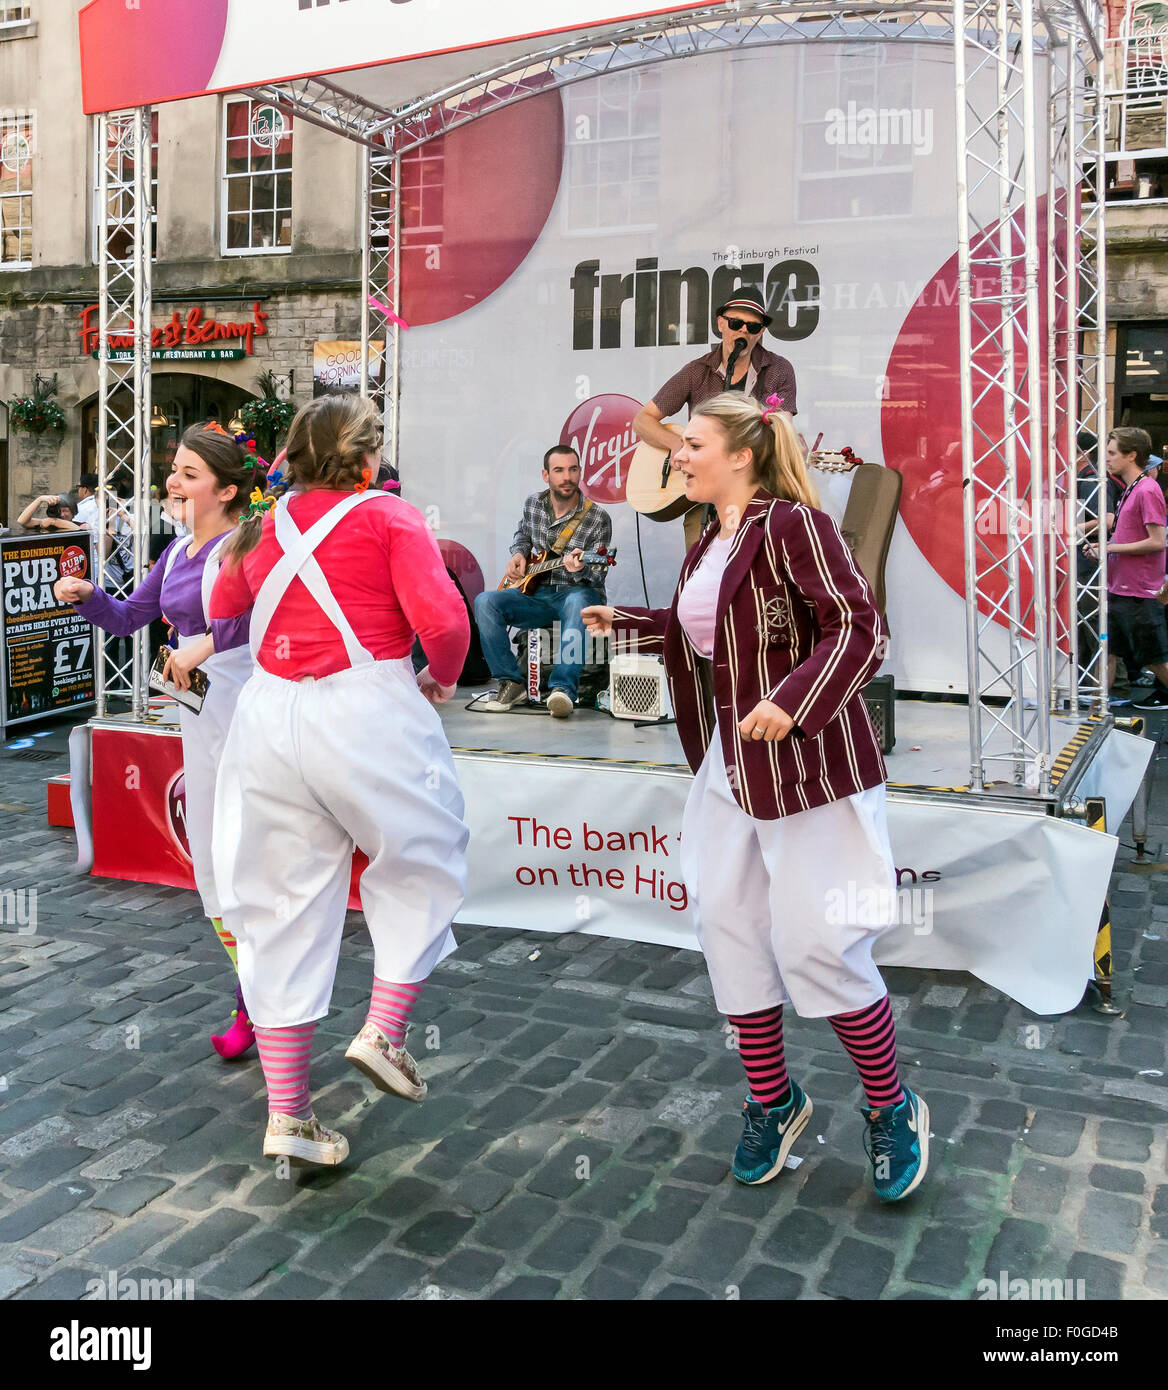 Artists & performers promoting their shows at the Edinburgh Festival Fringe 2015 in The Royal Mile Edinburgh Scotland Stock Photo